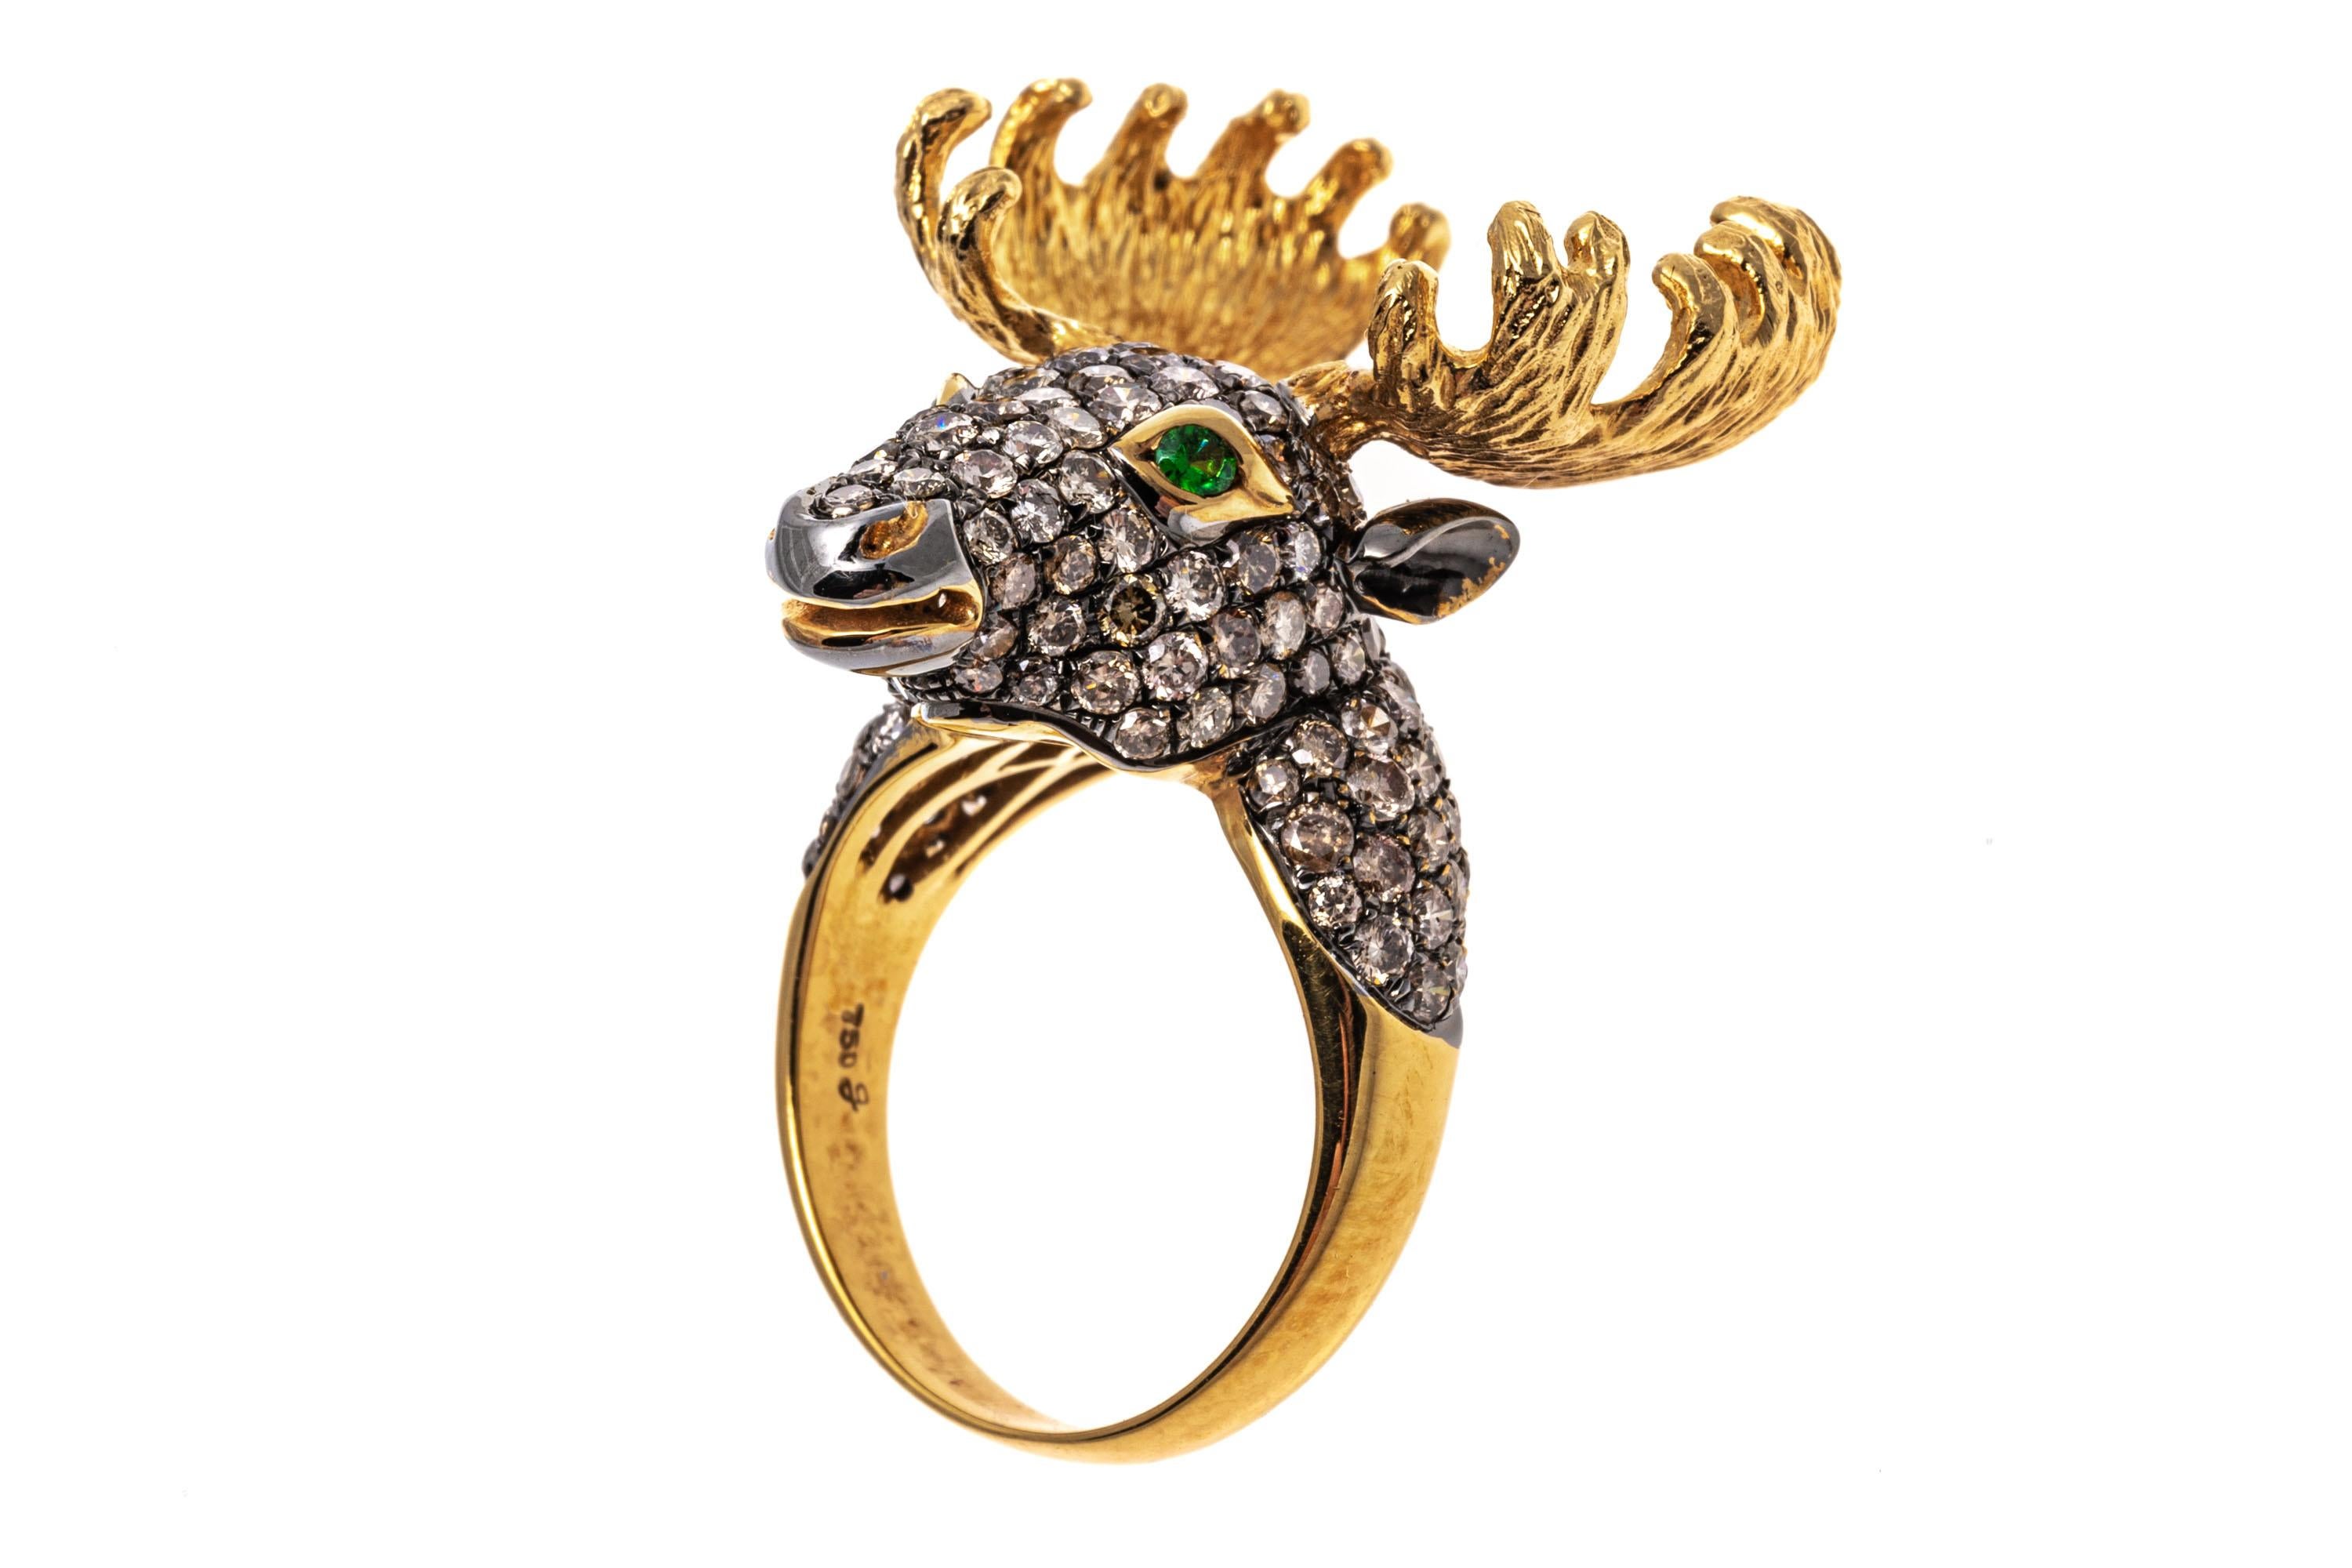 18k yellow gold ring. This charming ring is a handsome figural moose head,  decorated with large, brushed finish antlers and trimmed in the entirety with pave set, round faceted, cognac color diamonds, approximately 2.08 TCW.  Round faceted, bright